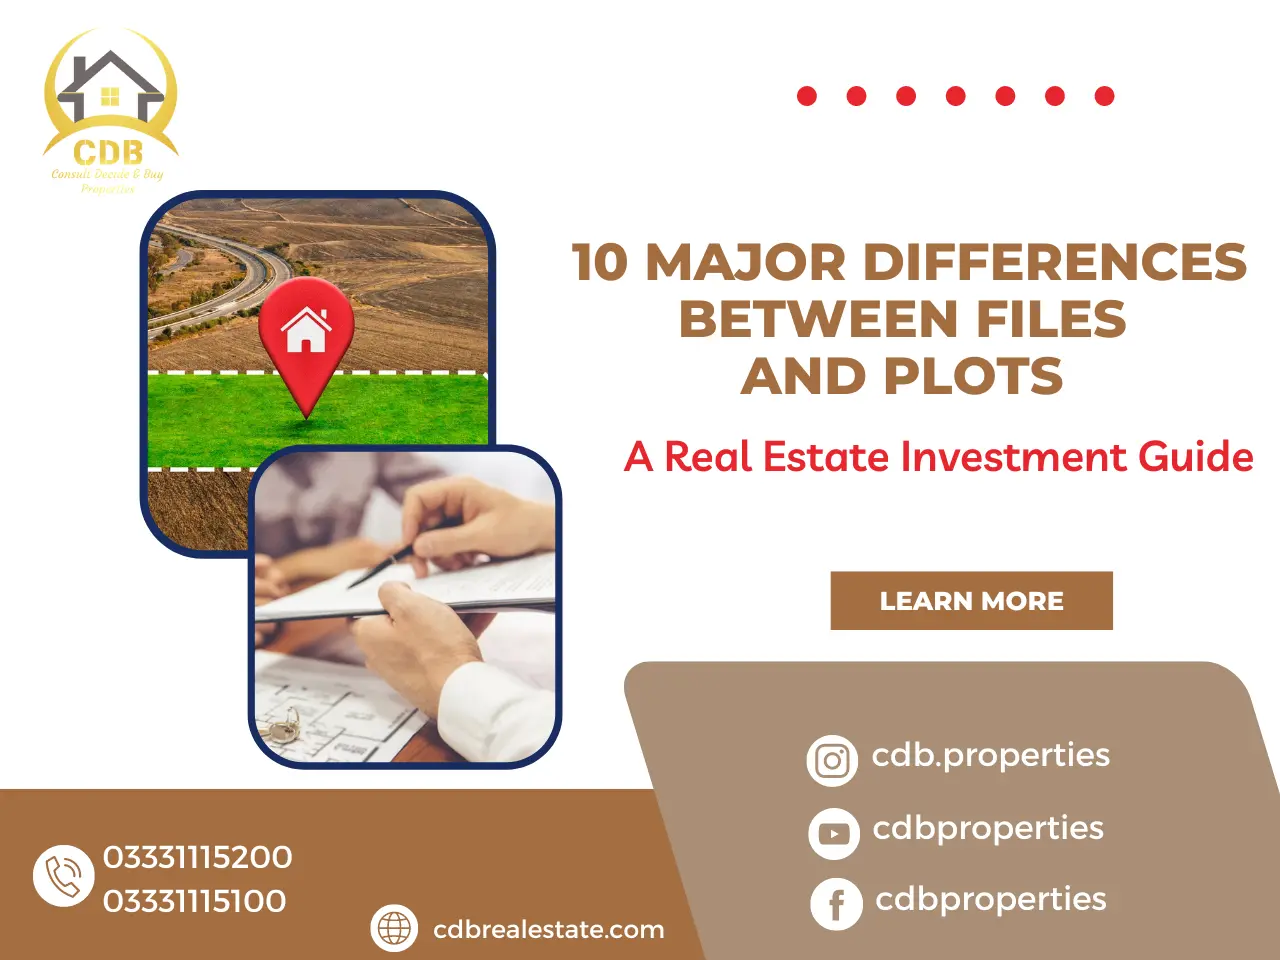 10 Major Differences Between Files and Plots - A Real Estate Investment Guide